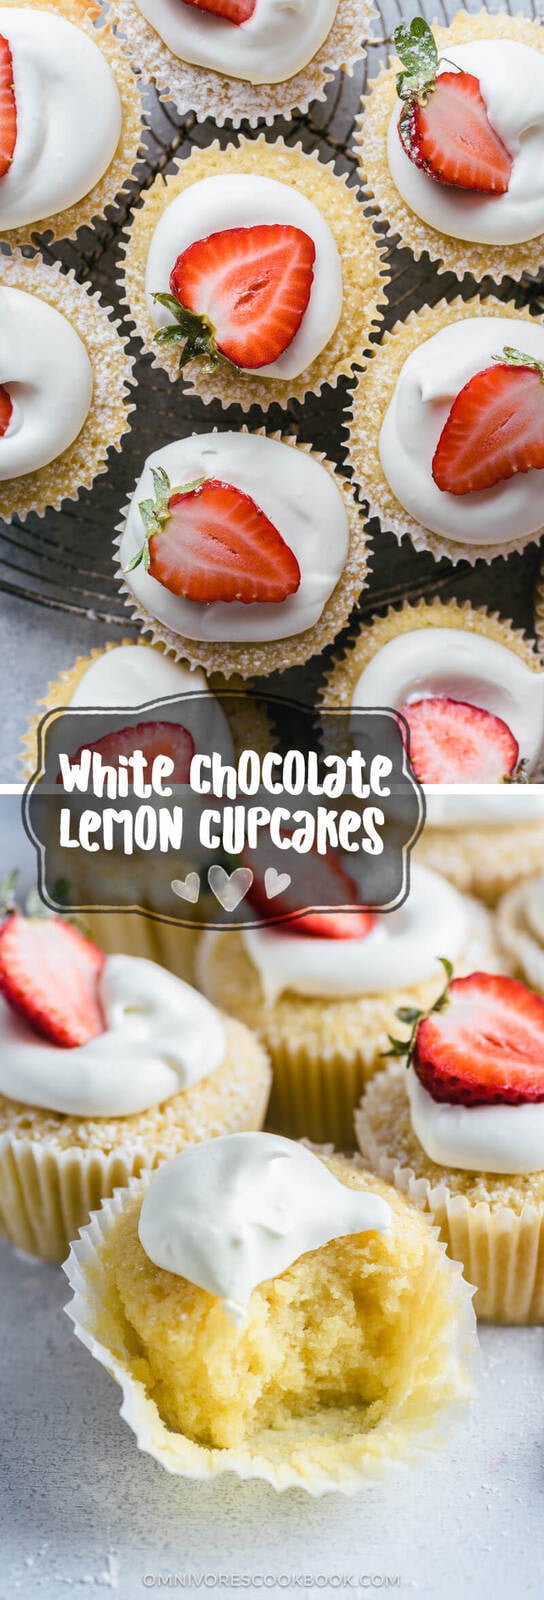 White Chocolate Lemon Cupcakes | Dessert | Sweets | Recipe | Party | Frosting | White Chocolate